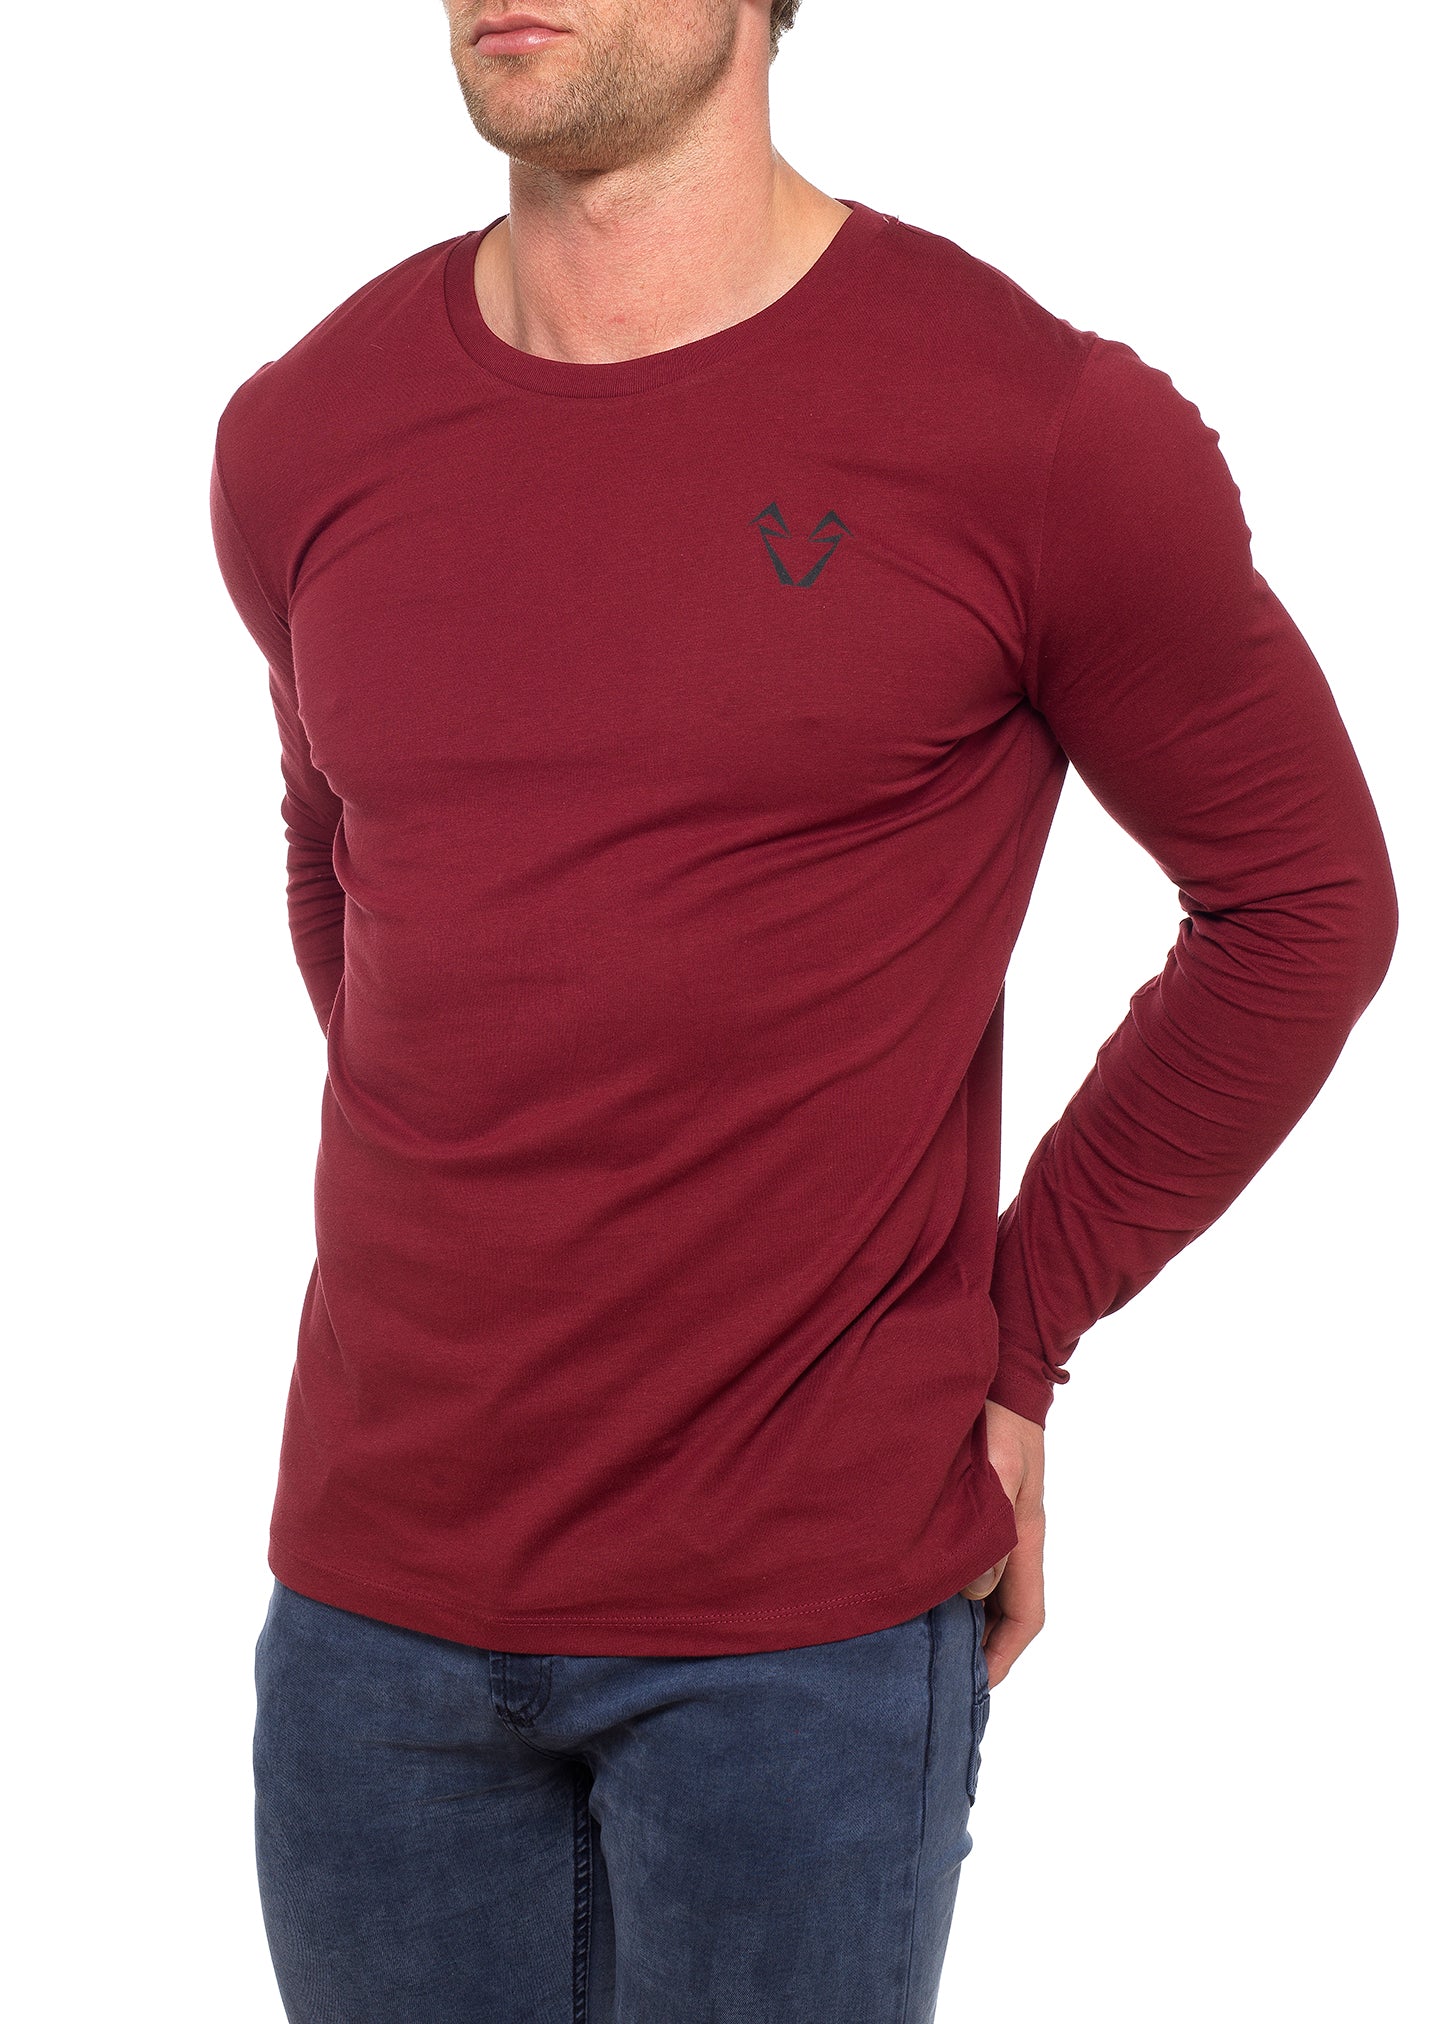 Mens Muscle Fit Burgundy T-Shirt